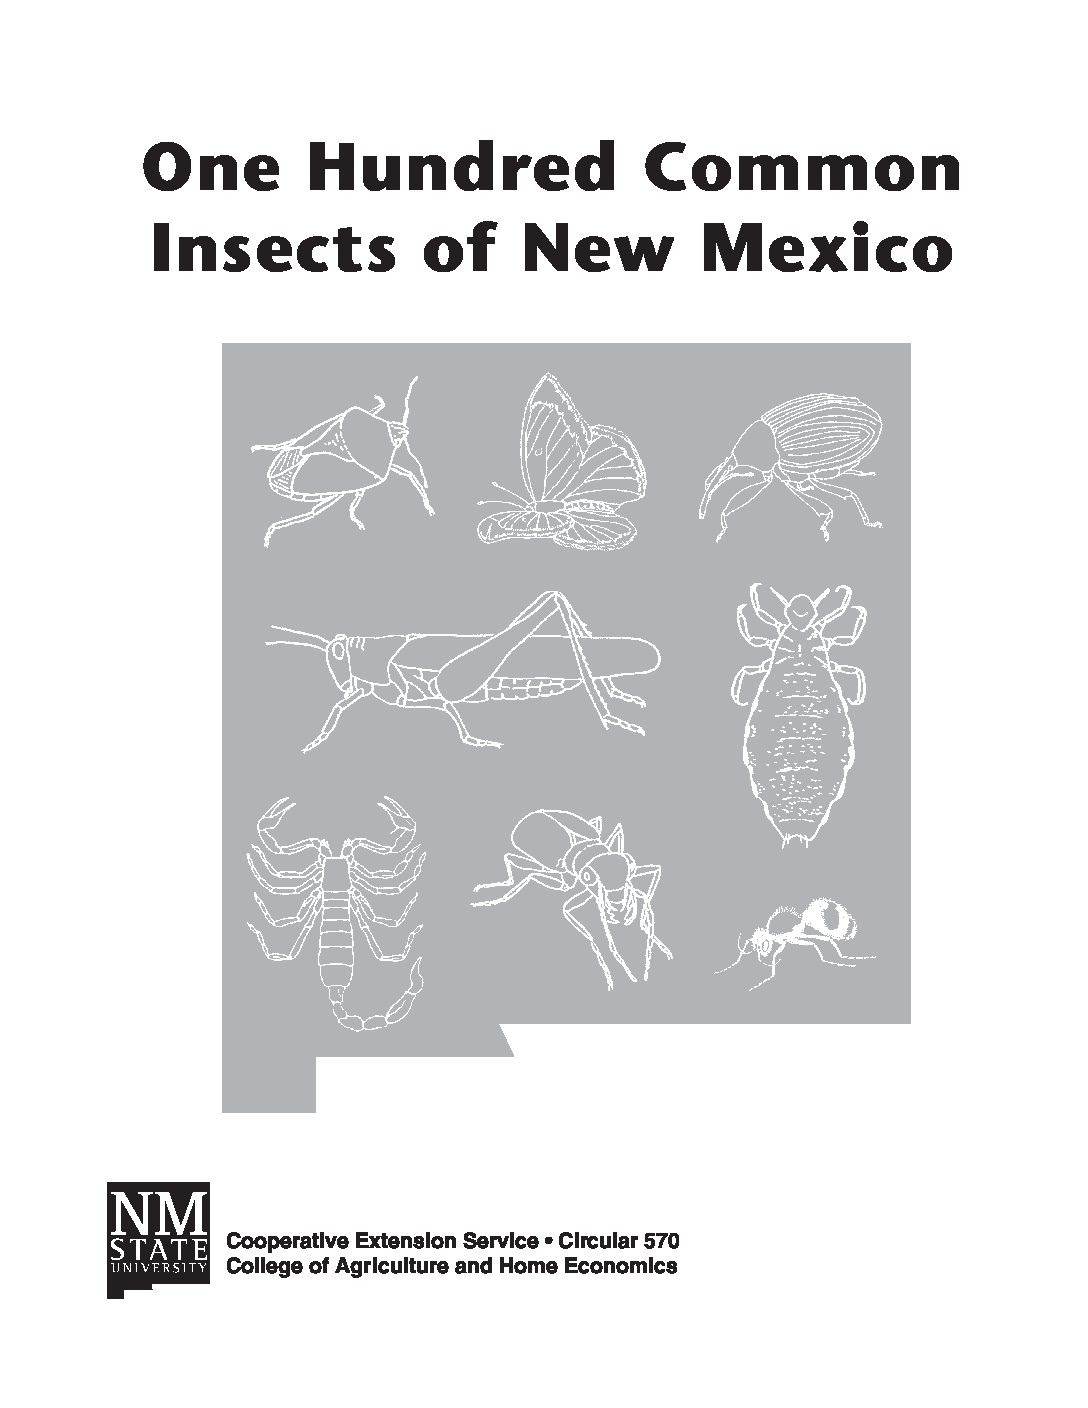 One Hundred Common Insects of New Mexico